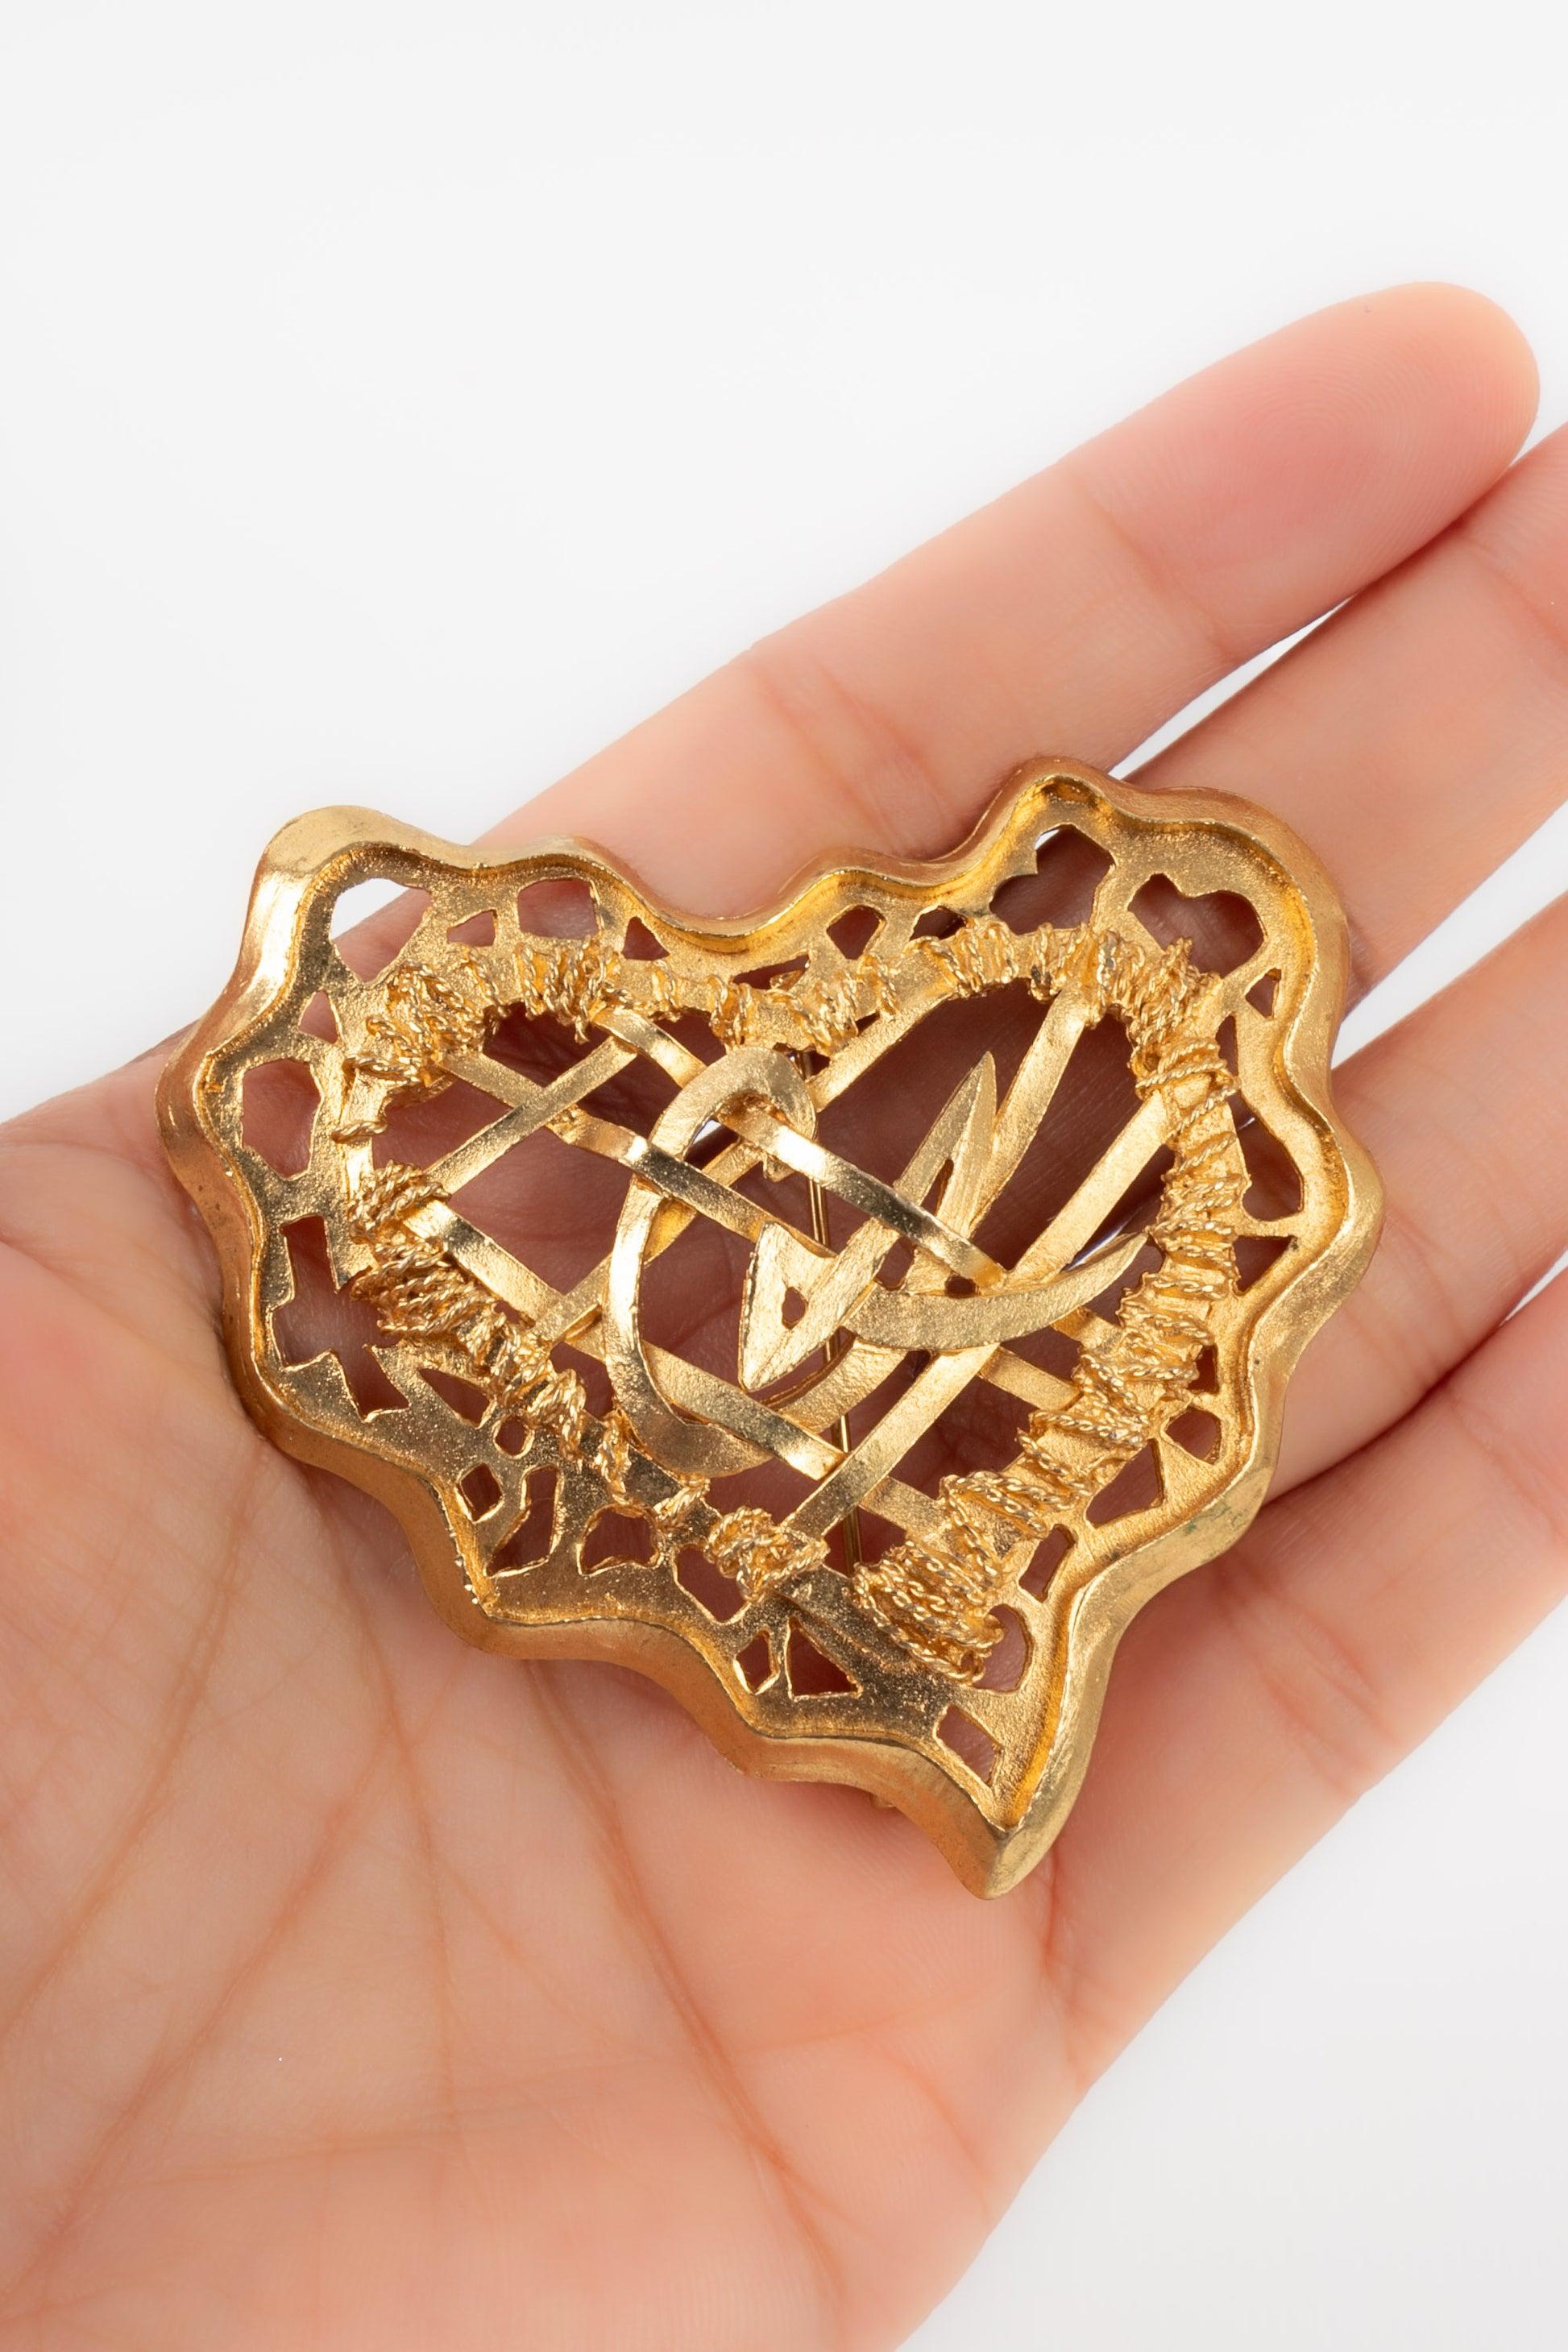 Christian Lacroix - (Made in France) Golden openwork metal brooch.

Additional information:
Condition: Very good condition
Dimensions: Height: 6 cm

Seller Reference: BR174